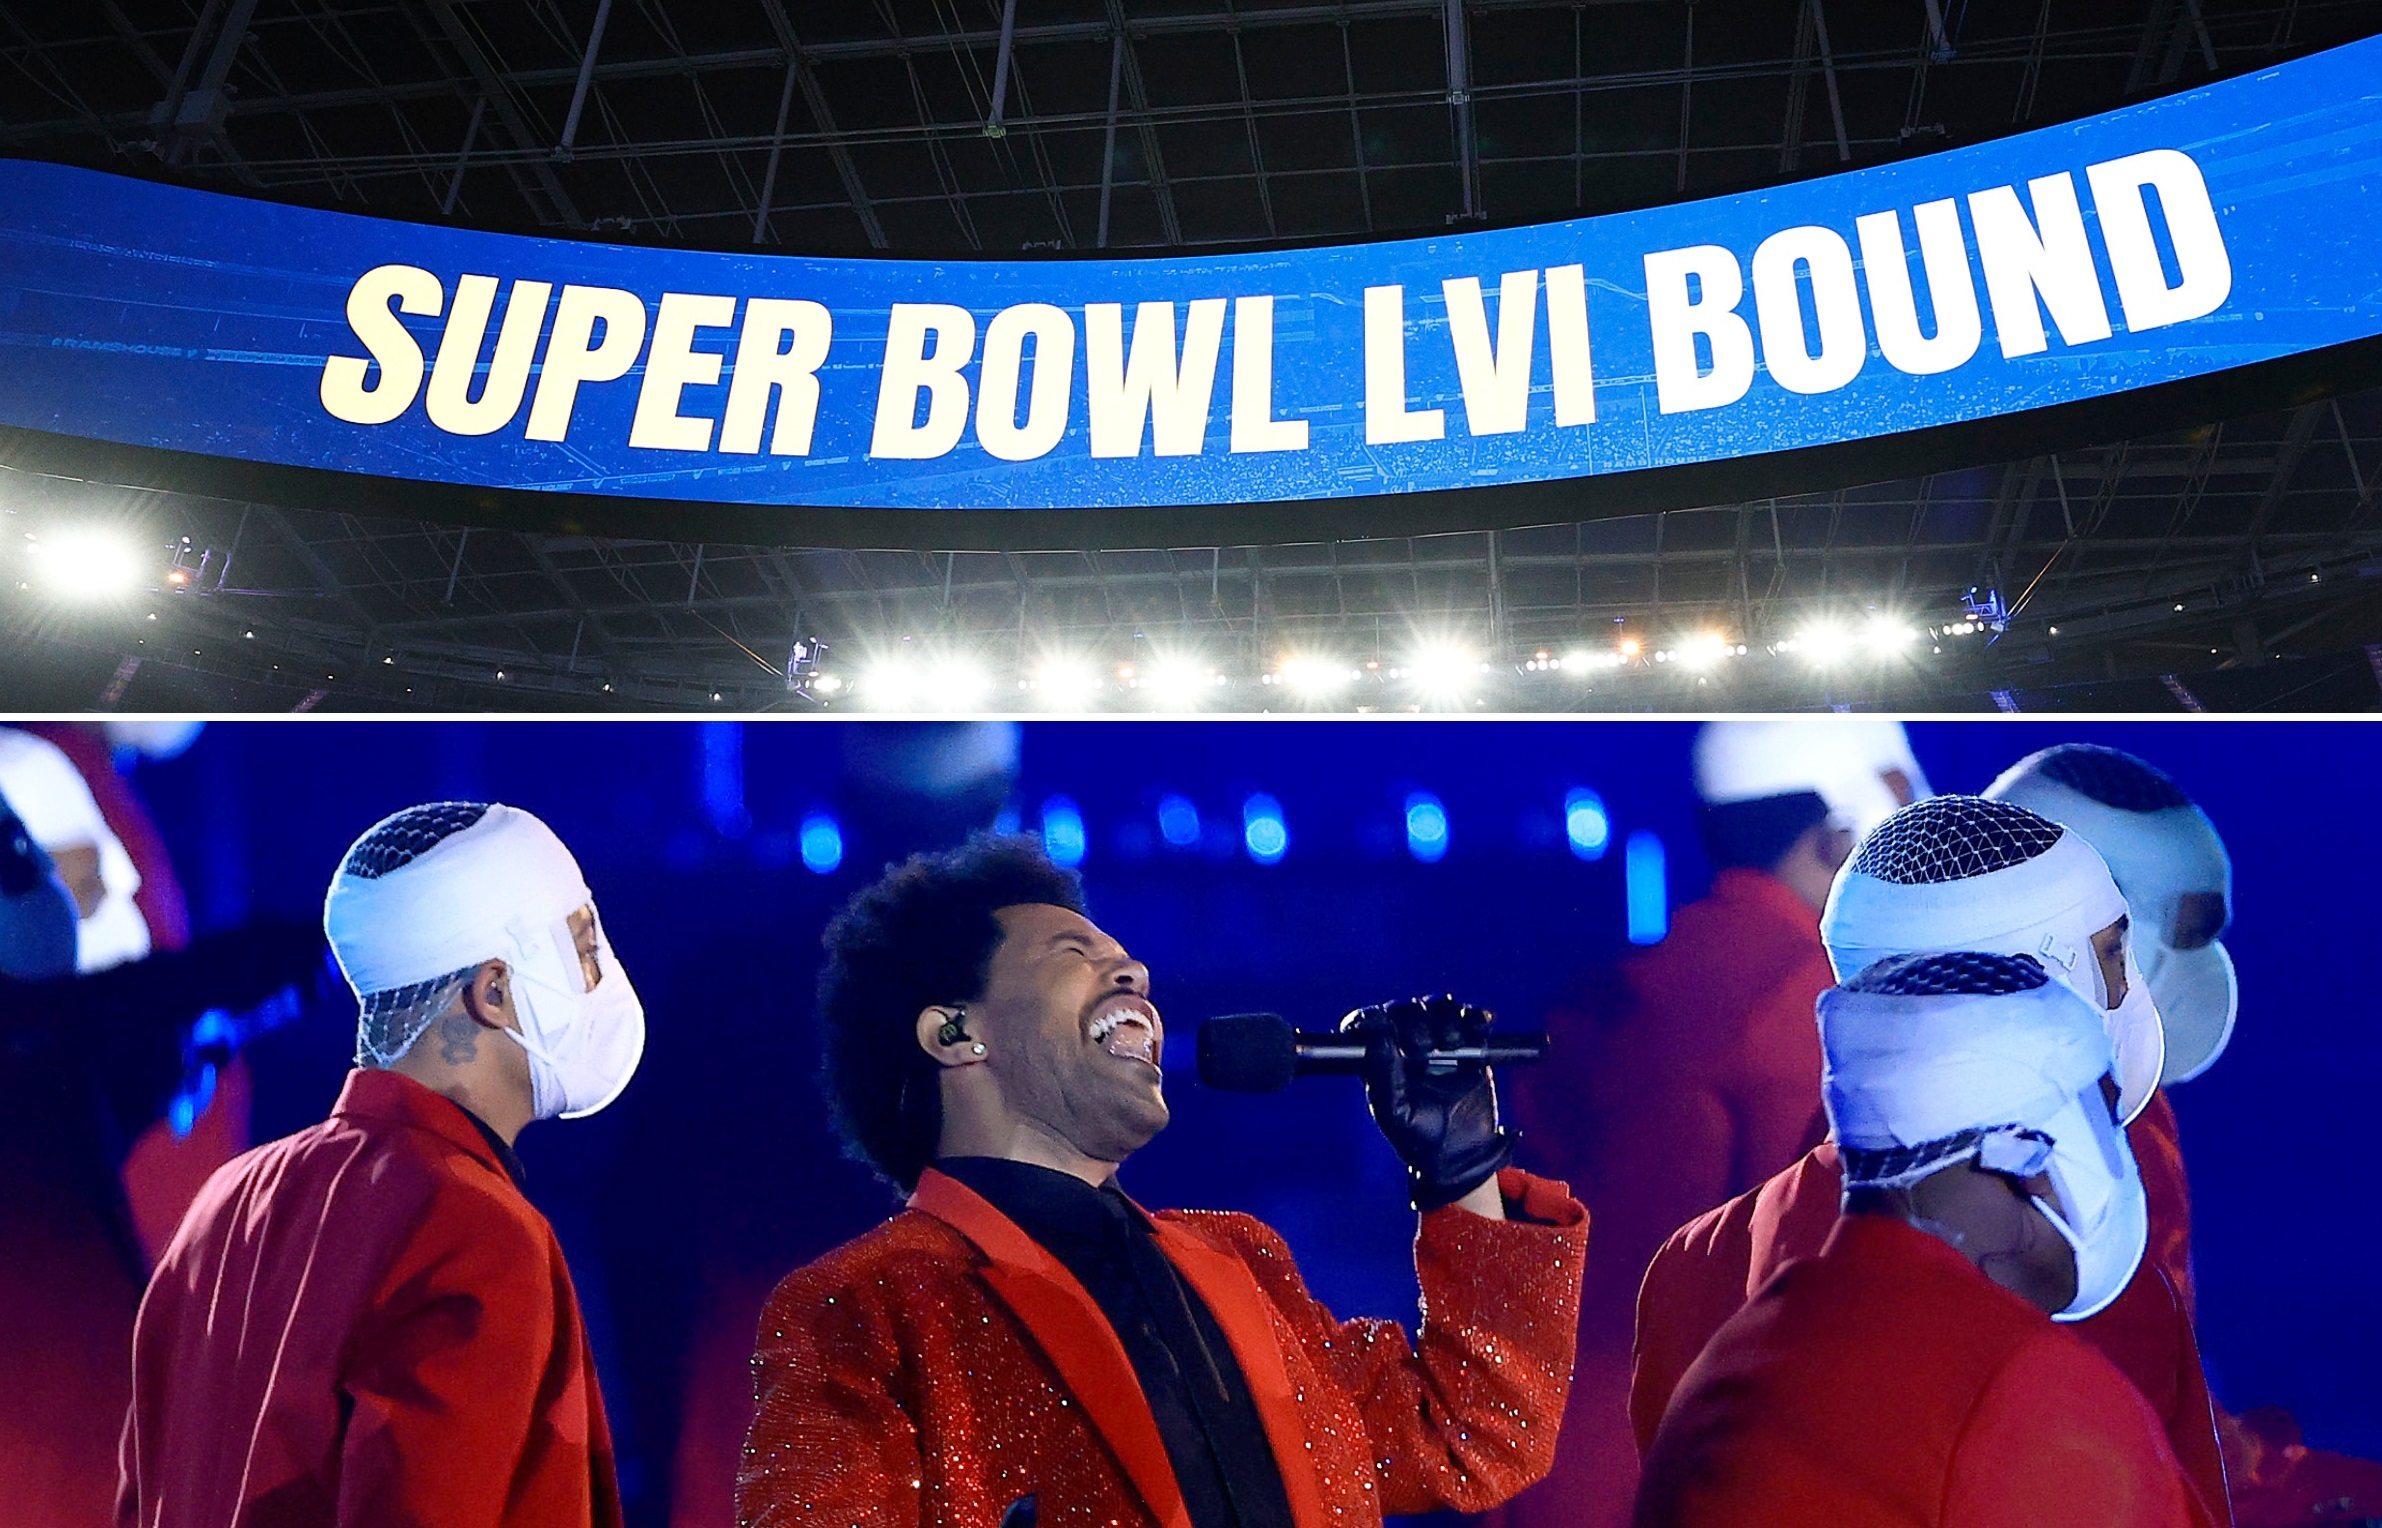 what time is the halftime show super bowl 2022